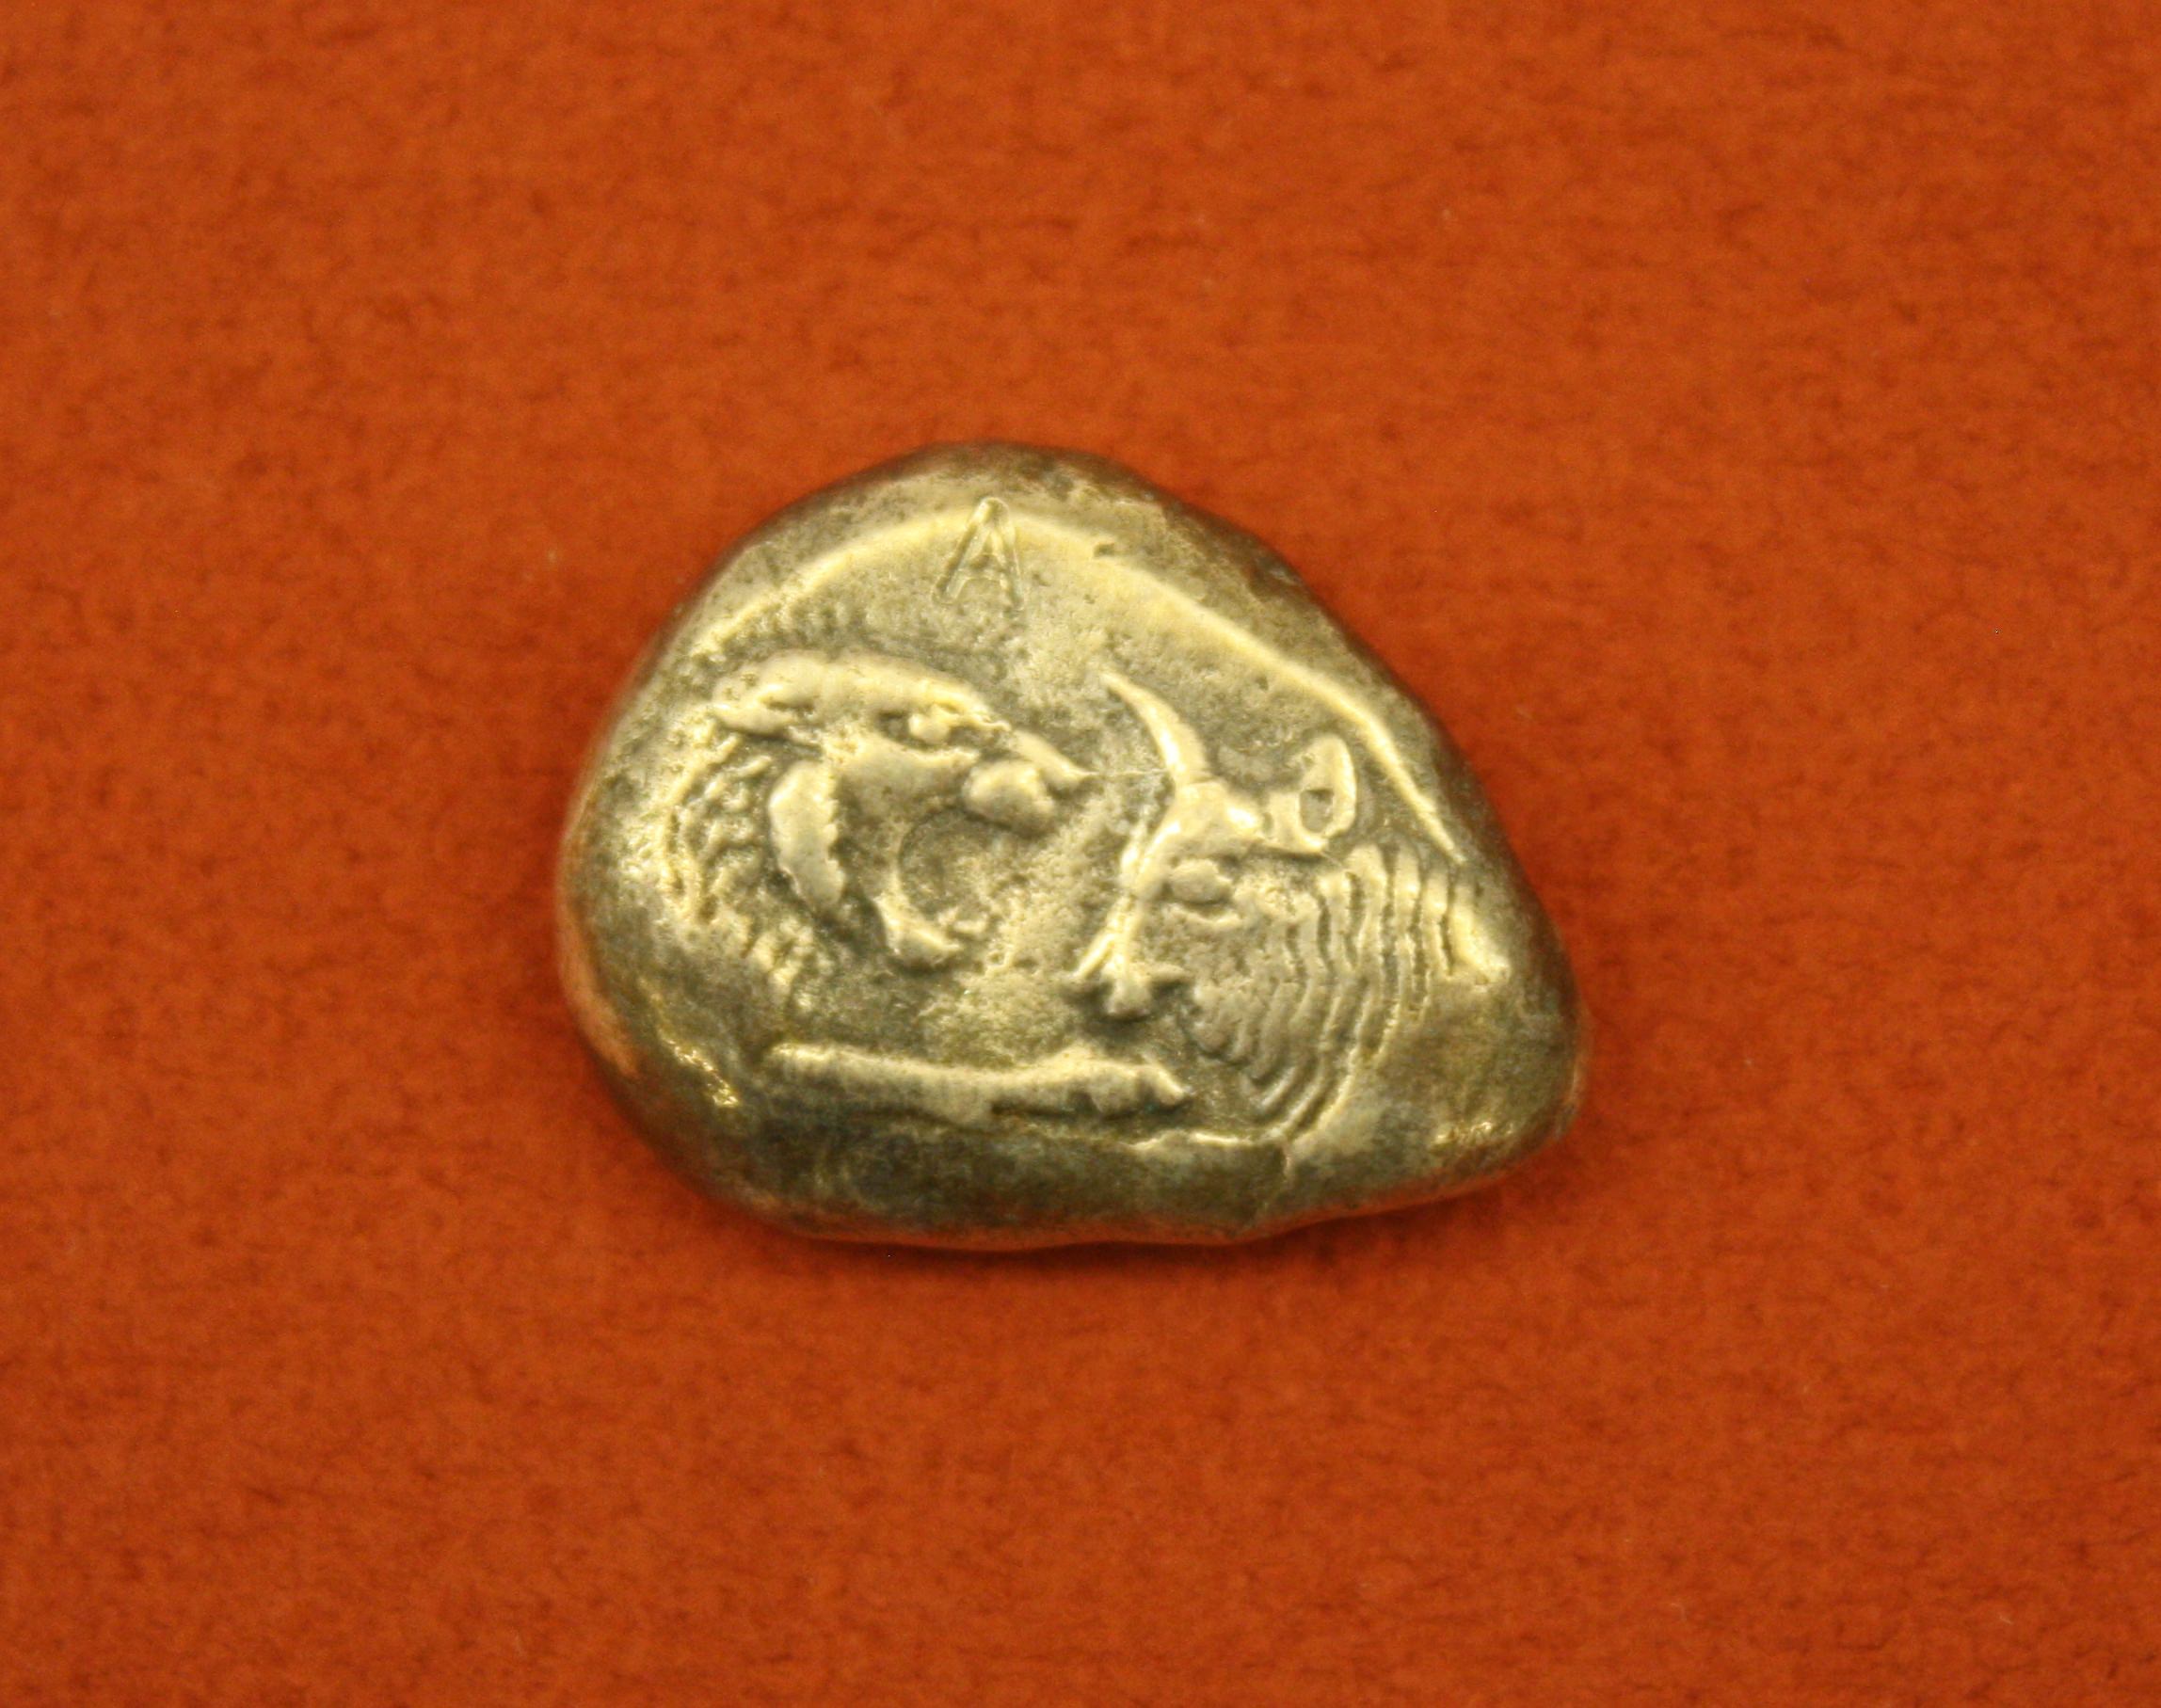 Dating Roman Silver Coins: Getting to the True Composition